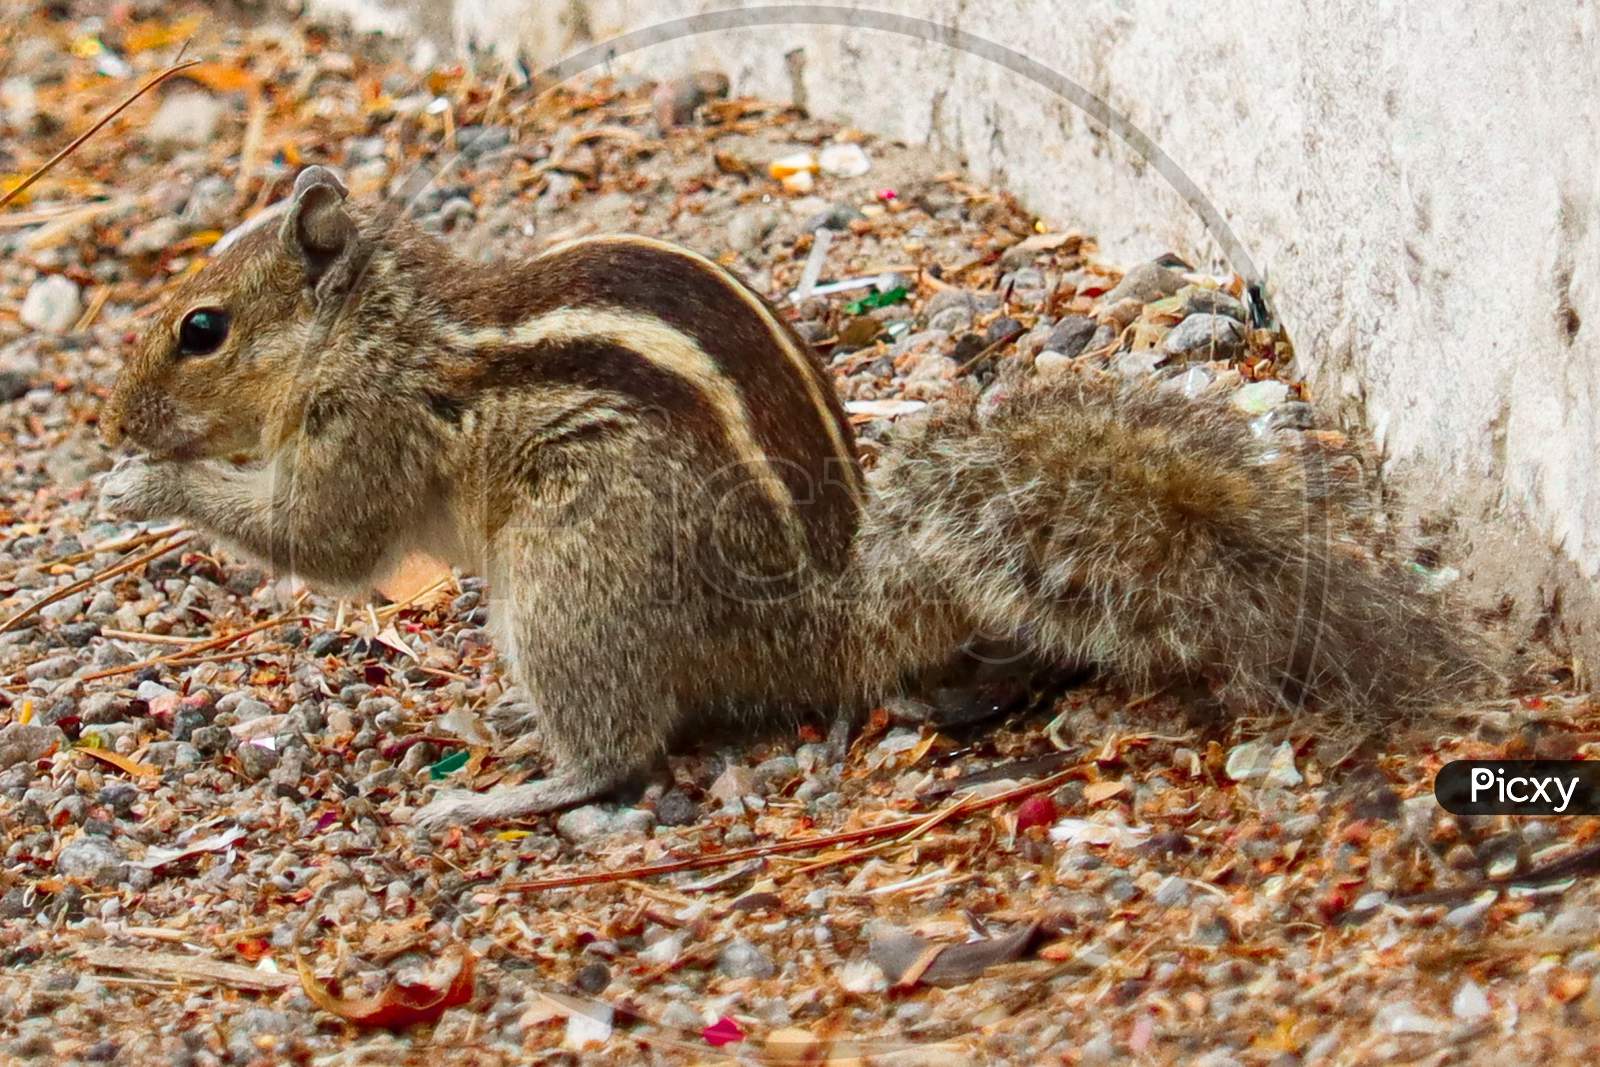 THIS IS A PHOTO OF Squirrel